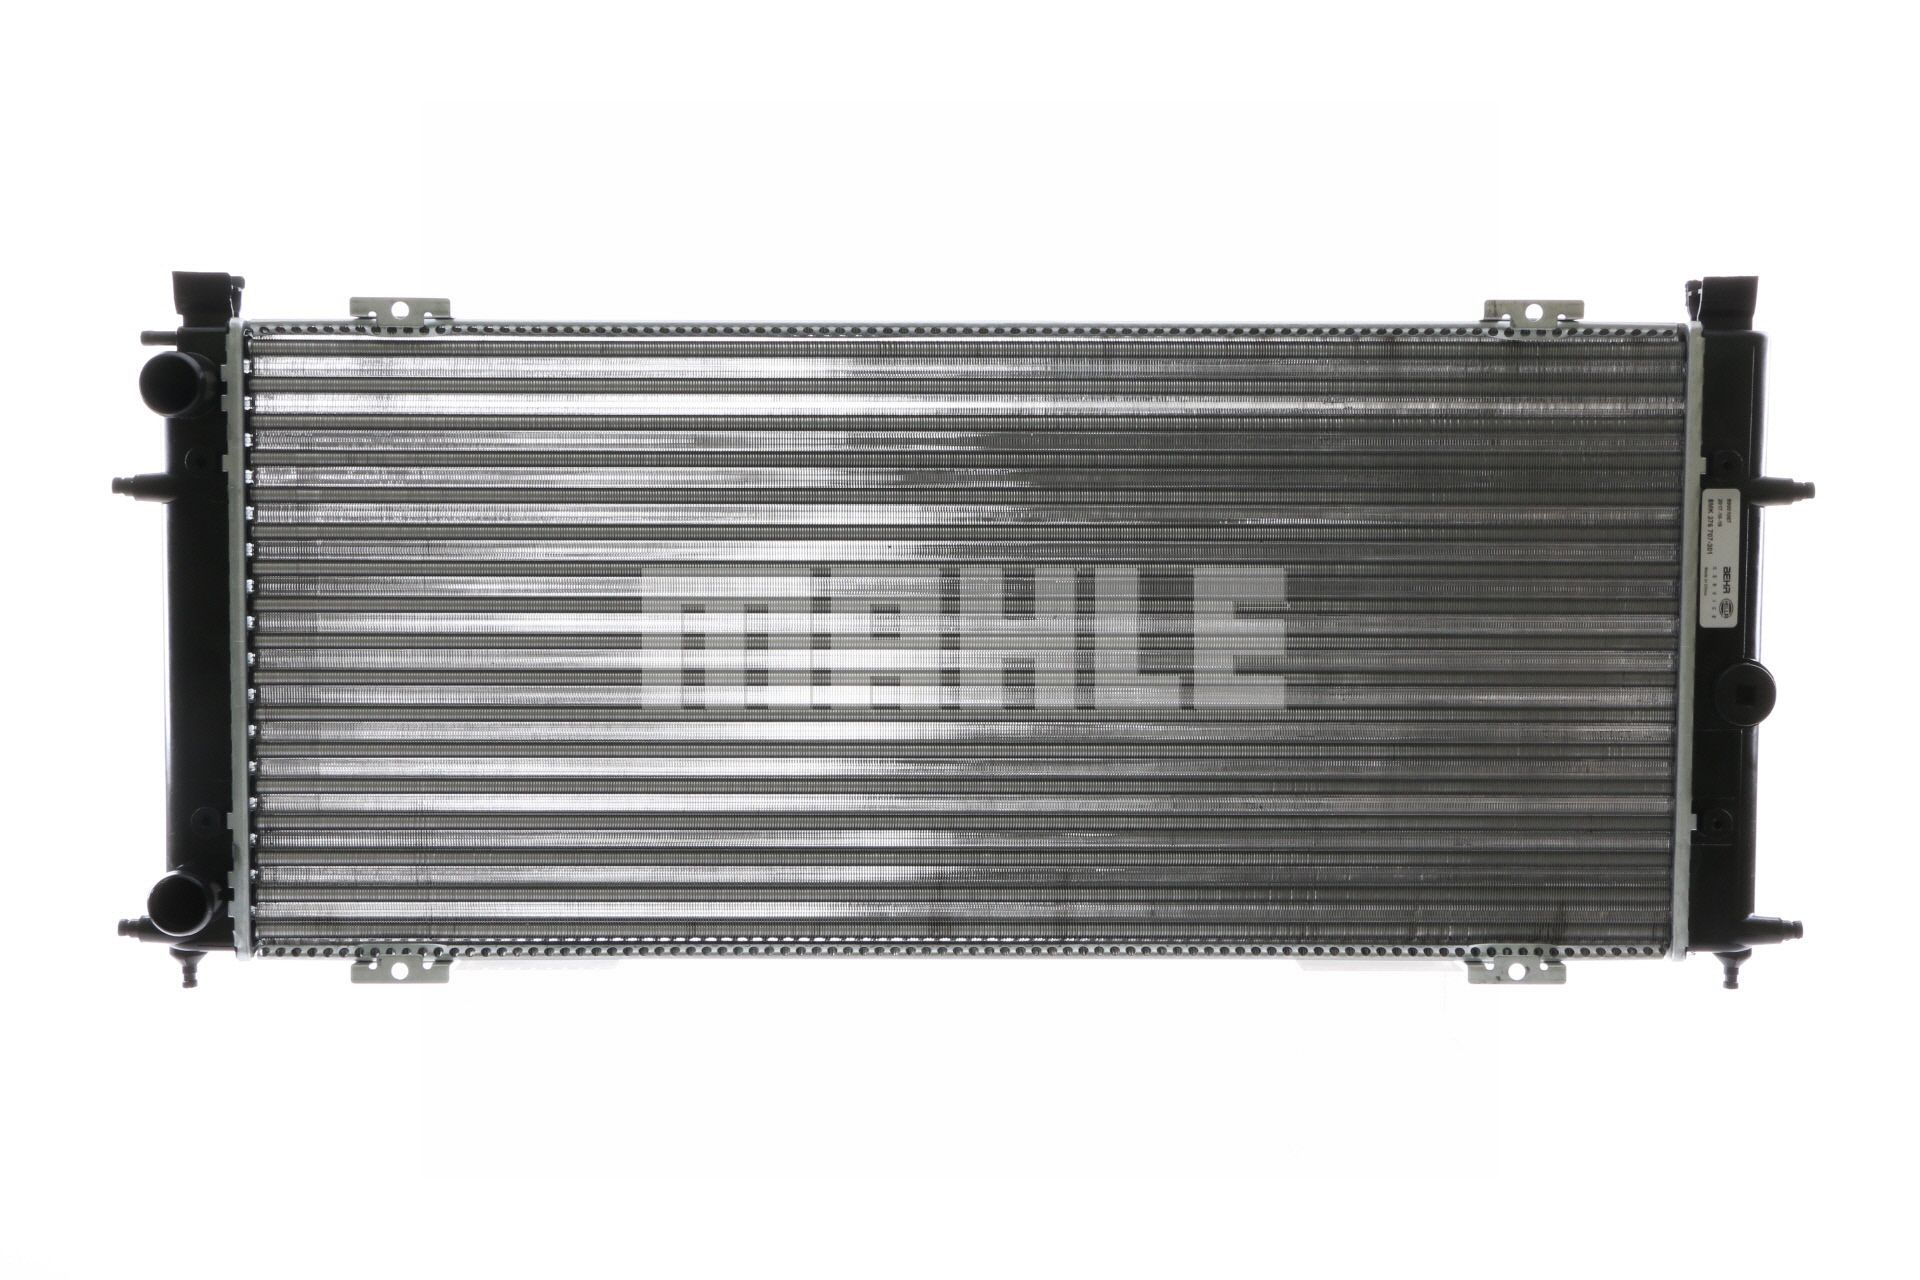 MAHLE ORIGINAL CR 173 000S Engine radiator for vehicles with air conditioning, 720 x 302 x 33 mm, Manual Transmission, Mechanically jointed cooling fins